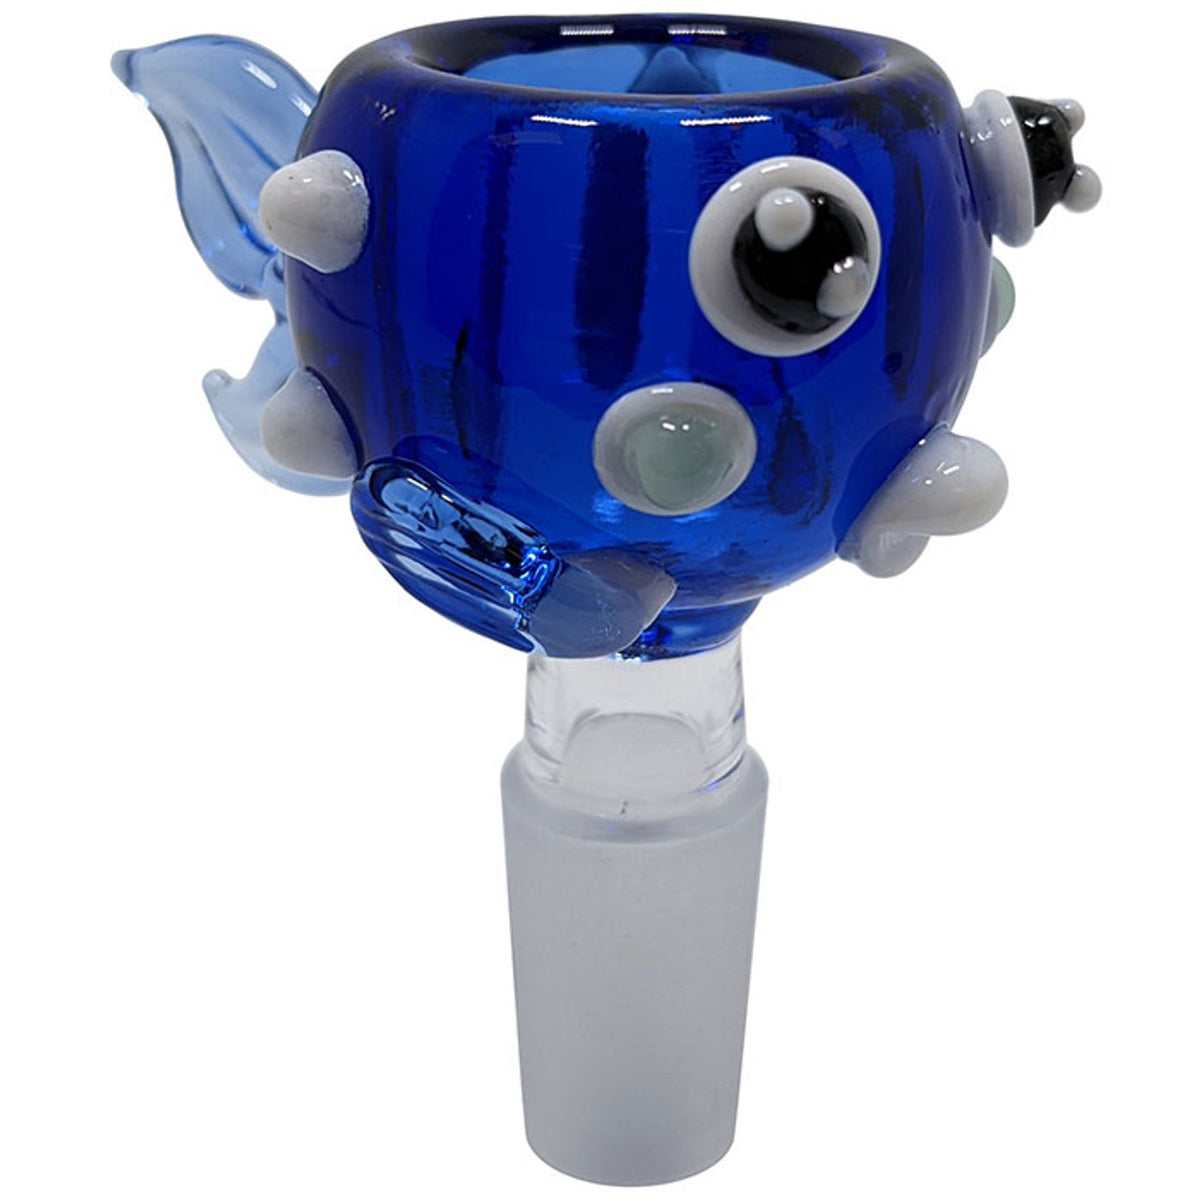 Full Color Fish Bowl - 14mm Male